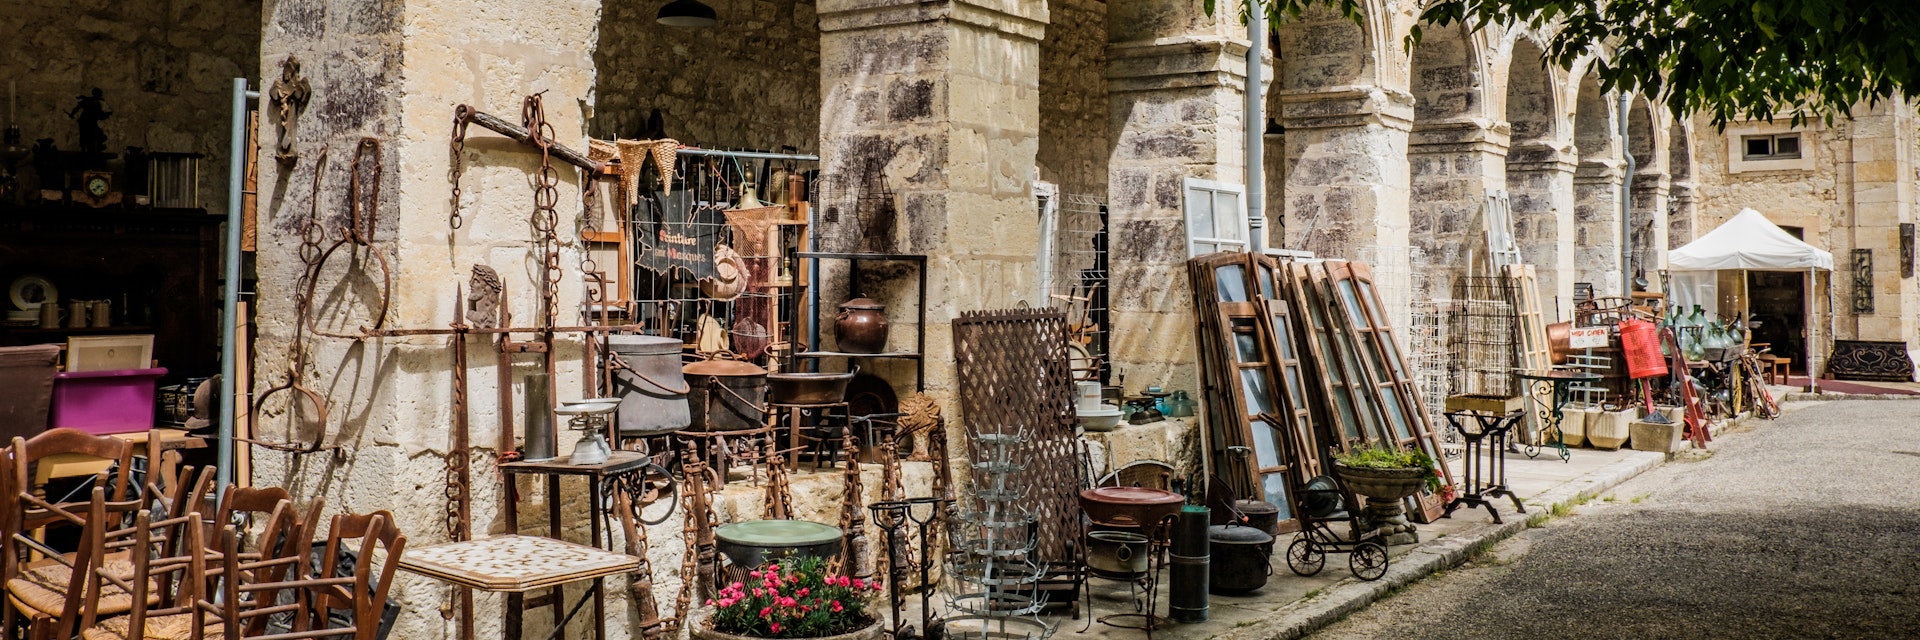 Flea market located in an old palace in Lectoure, France.